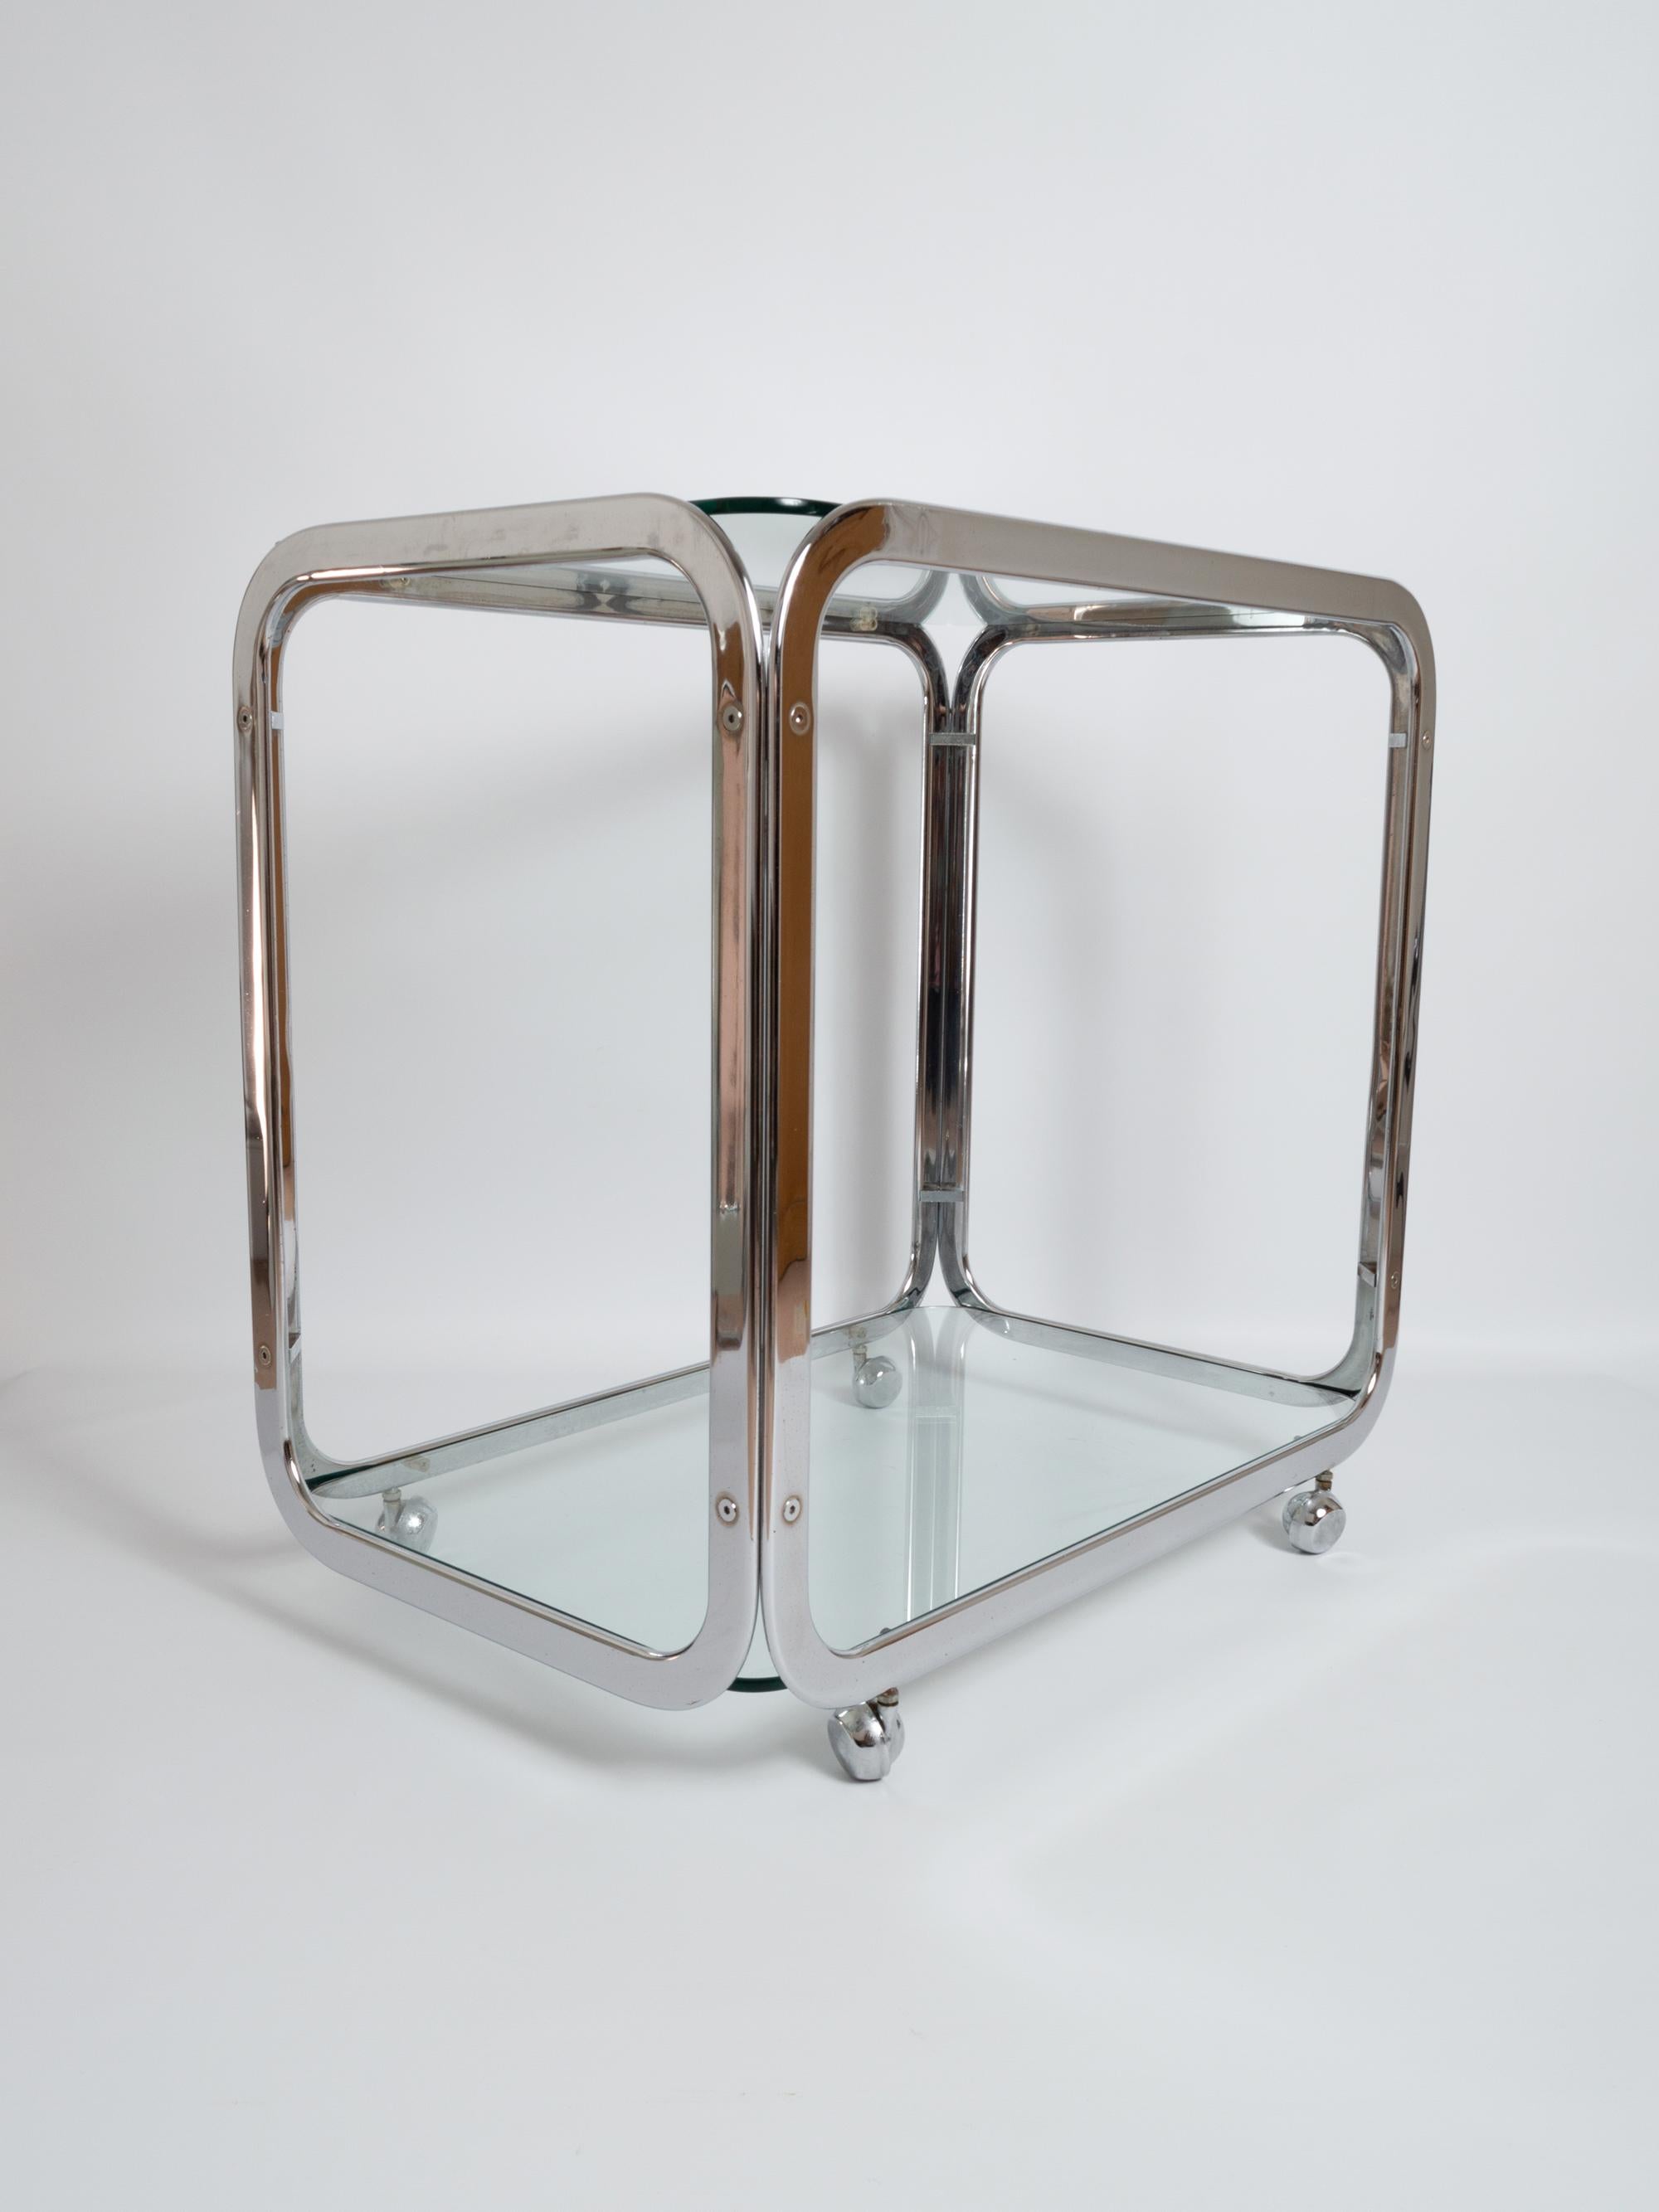 Late 20th Century Midcentury Chrome-Plated Bar Cart Drinks Trolley, Italy, circa 1970